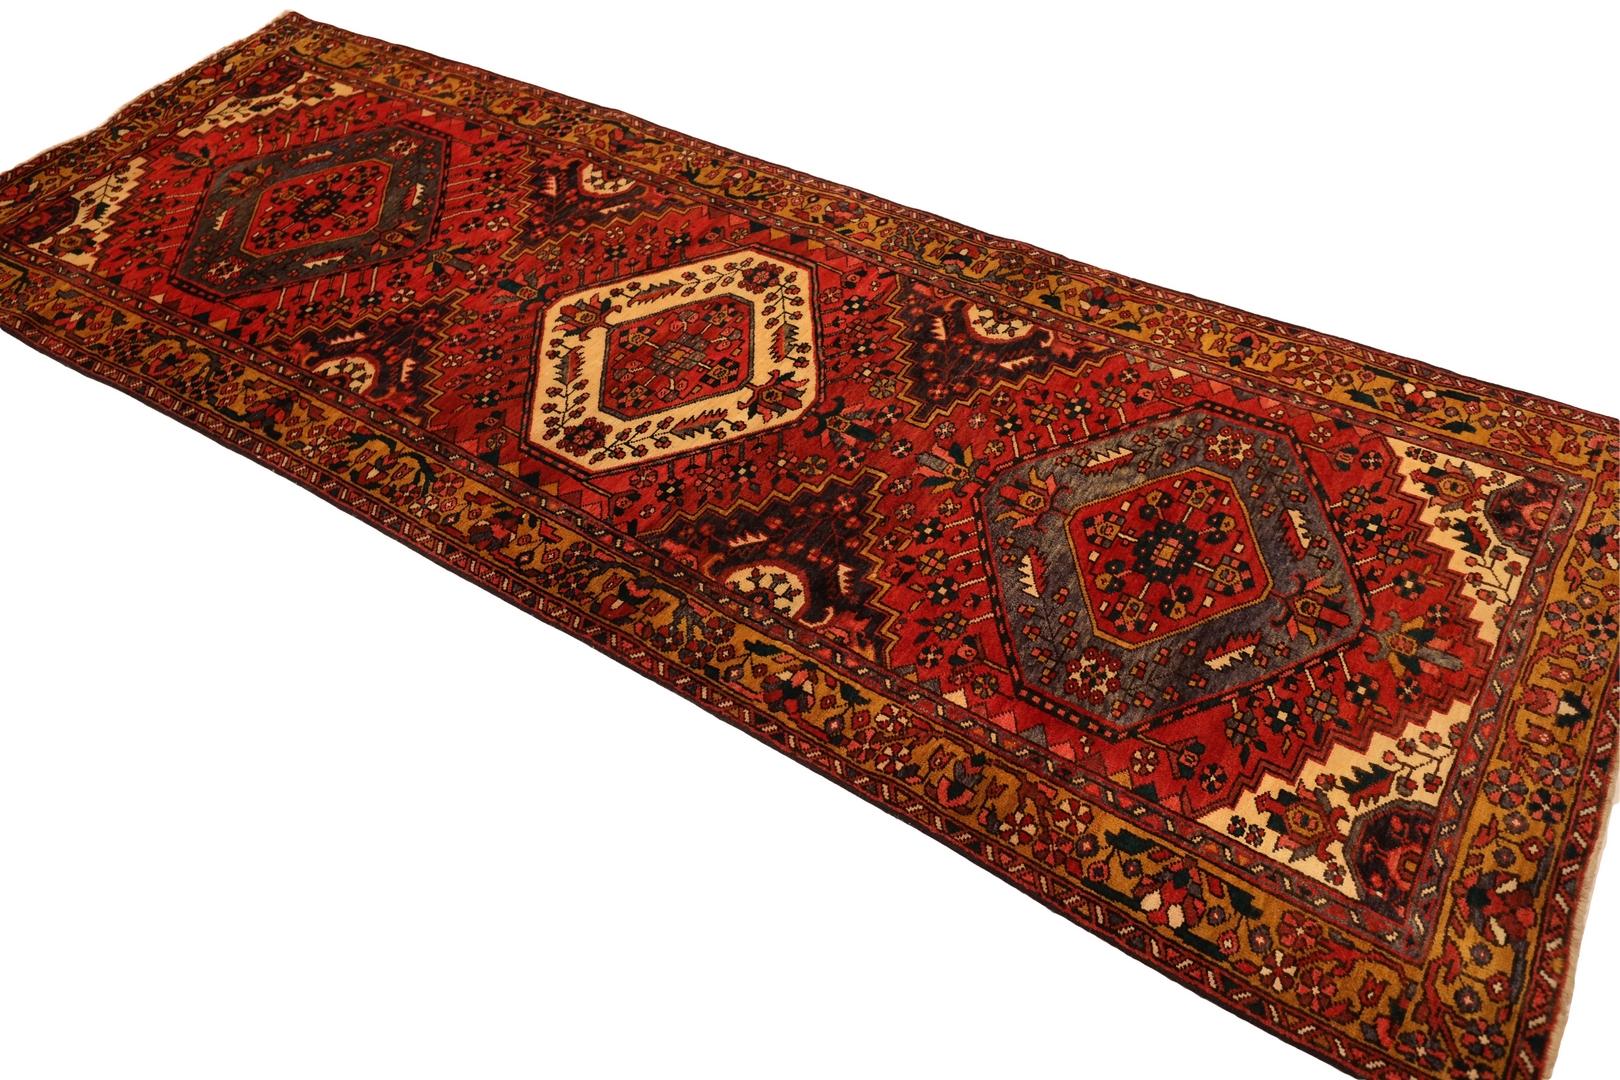 Hand-Knotted Northwest Persian Semi-Antique Runner - 3'7